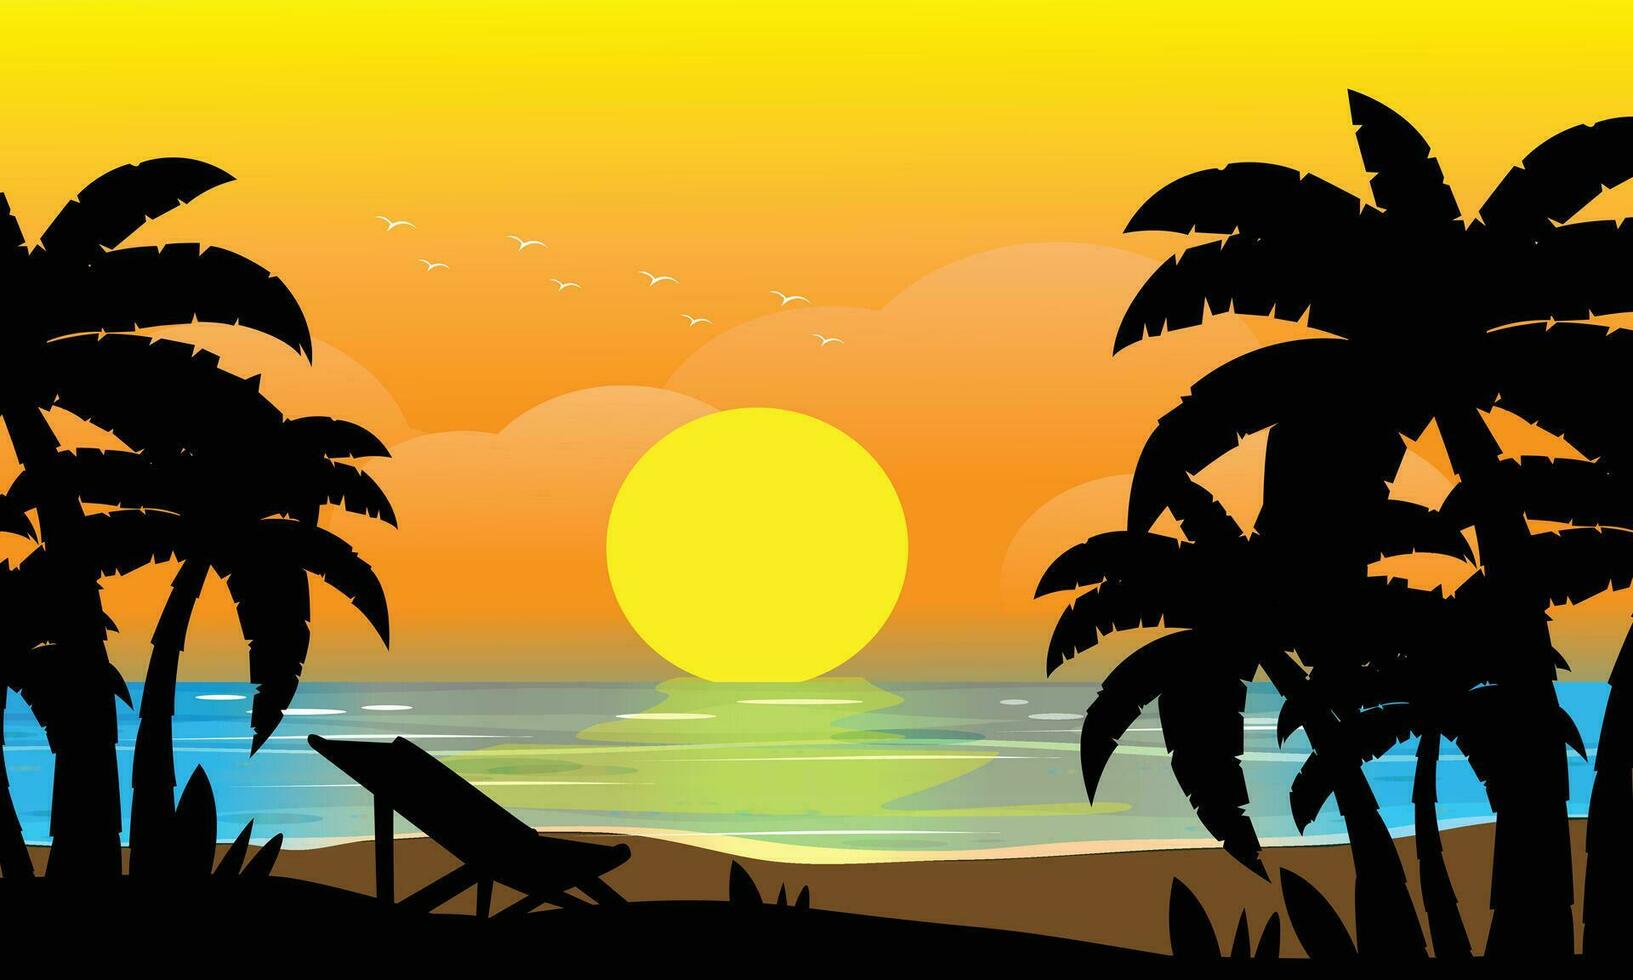 natural beach and sunset vector